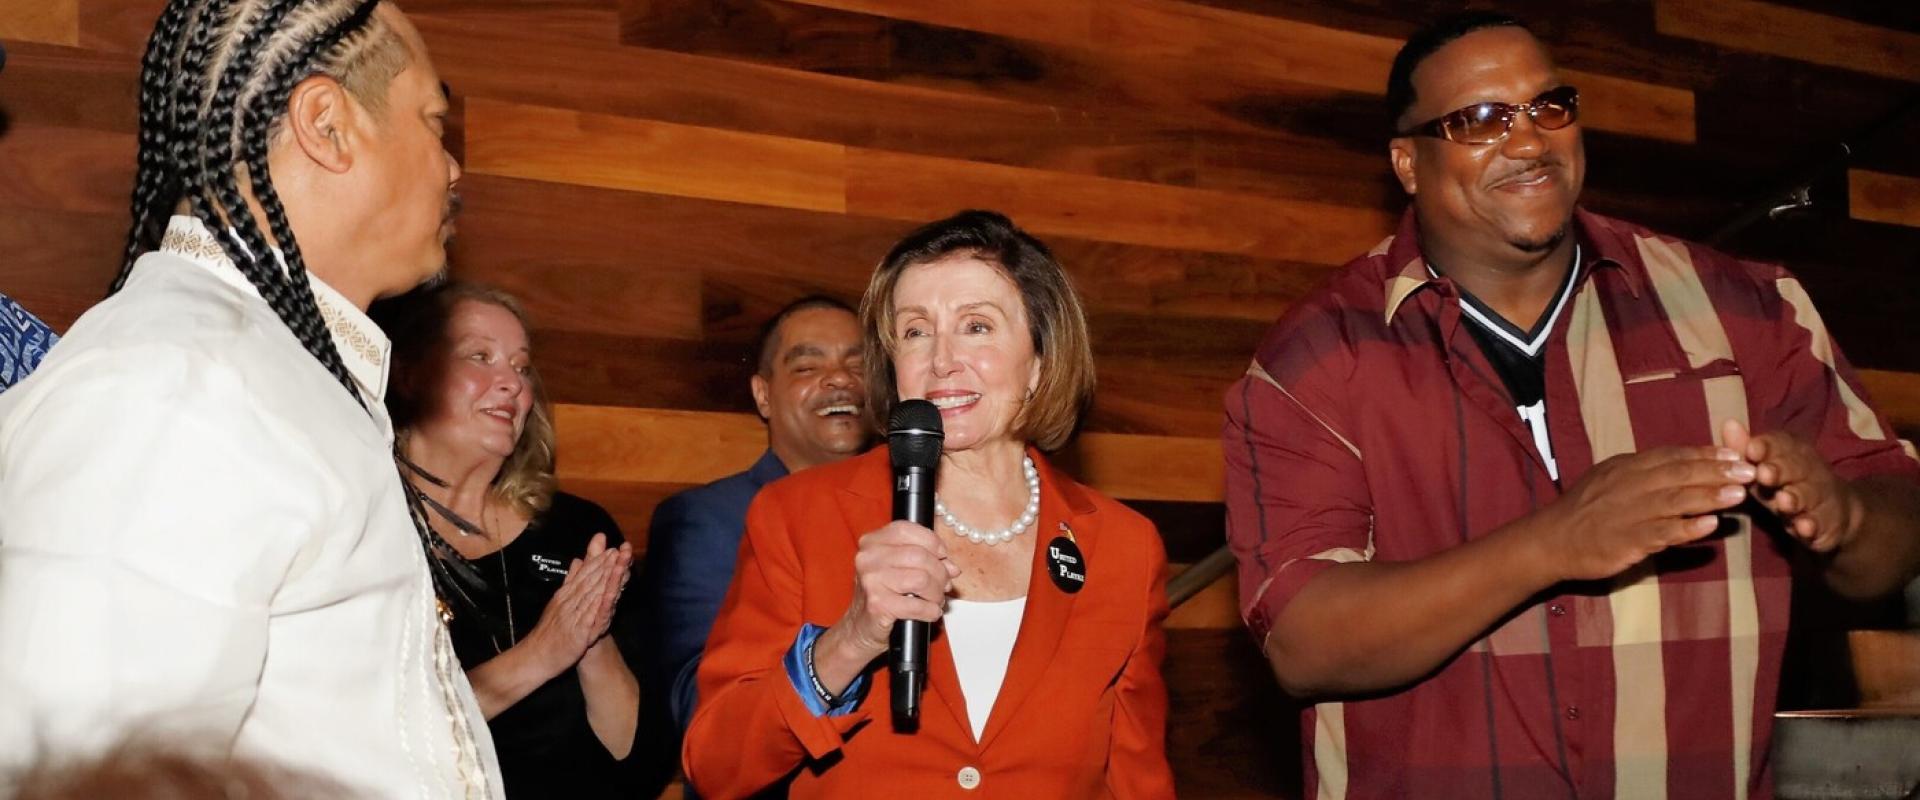 Congresswoman Nancy Pelosi joined Rudy Corupz, Jr., Founder and Executive Director of United Playaz, to honor UP’s 28th Anniversary with programs providing youth with adult support, academic enrichment and leadership skills under the motto “It Takes The H